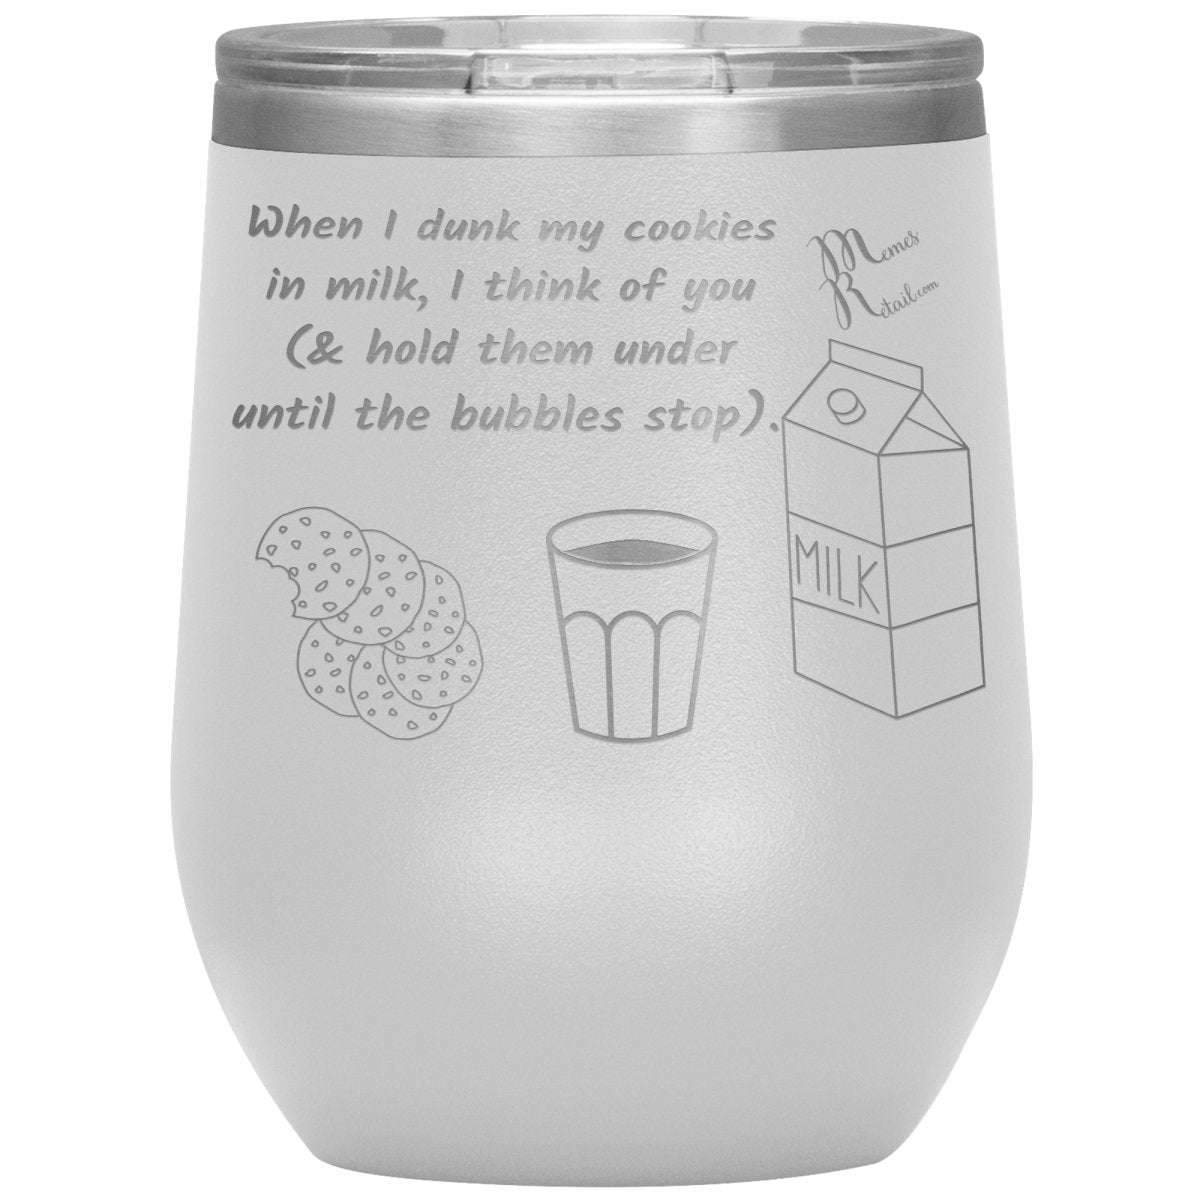 When I dunk My Cookies in Milk, I think of You - Tumblers, 12oz Wine Insulated Tumbler / White - MemesRetail.com